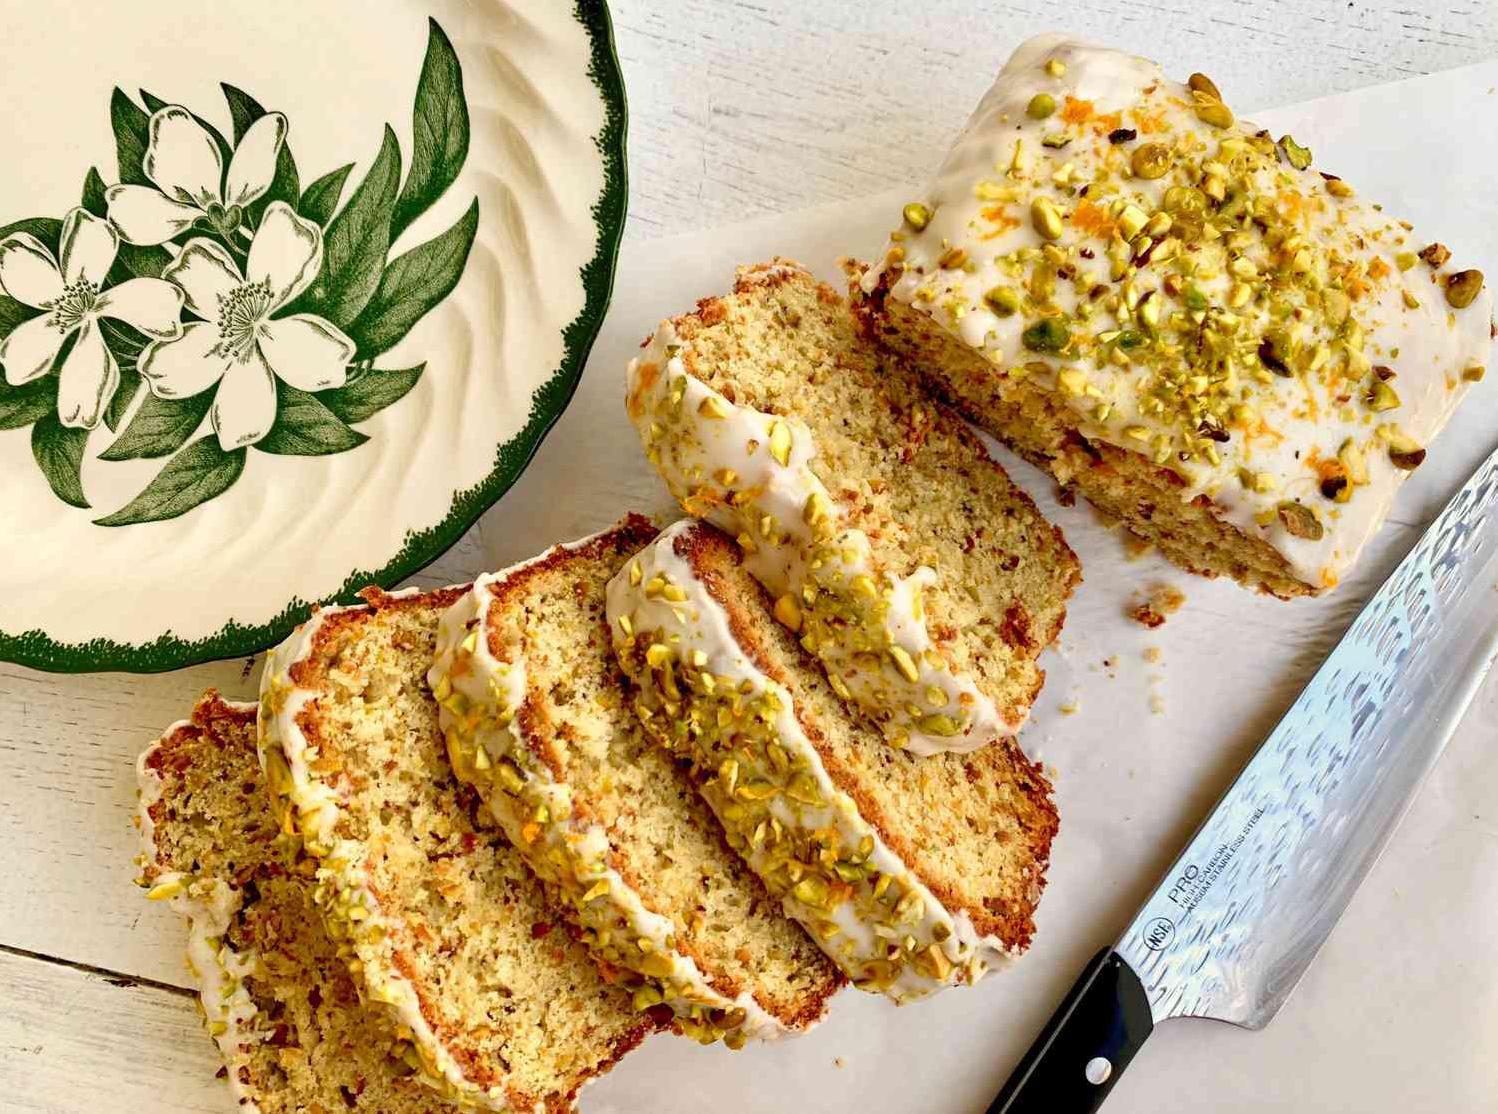  Get ready to swoon over this nutty Pistachio Pound Cake.